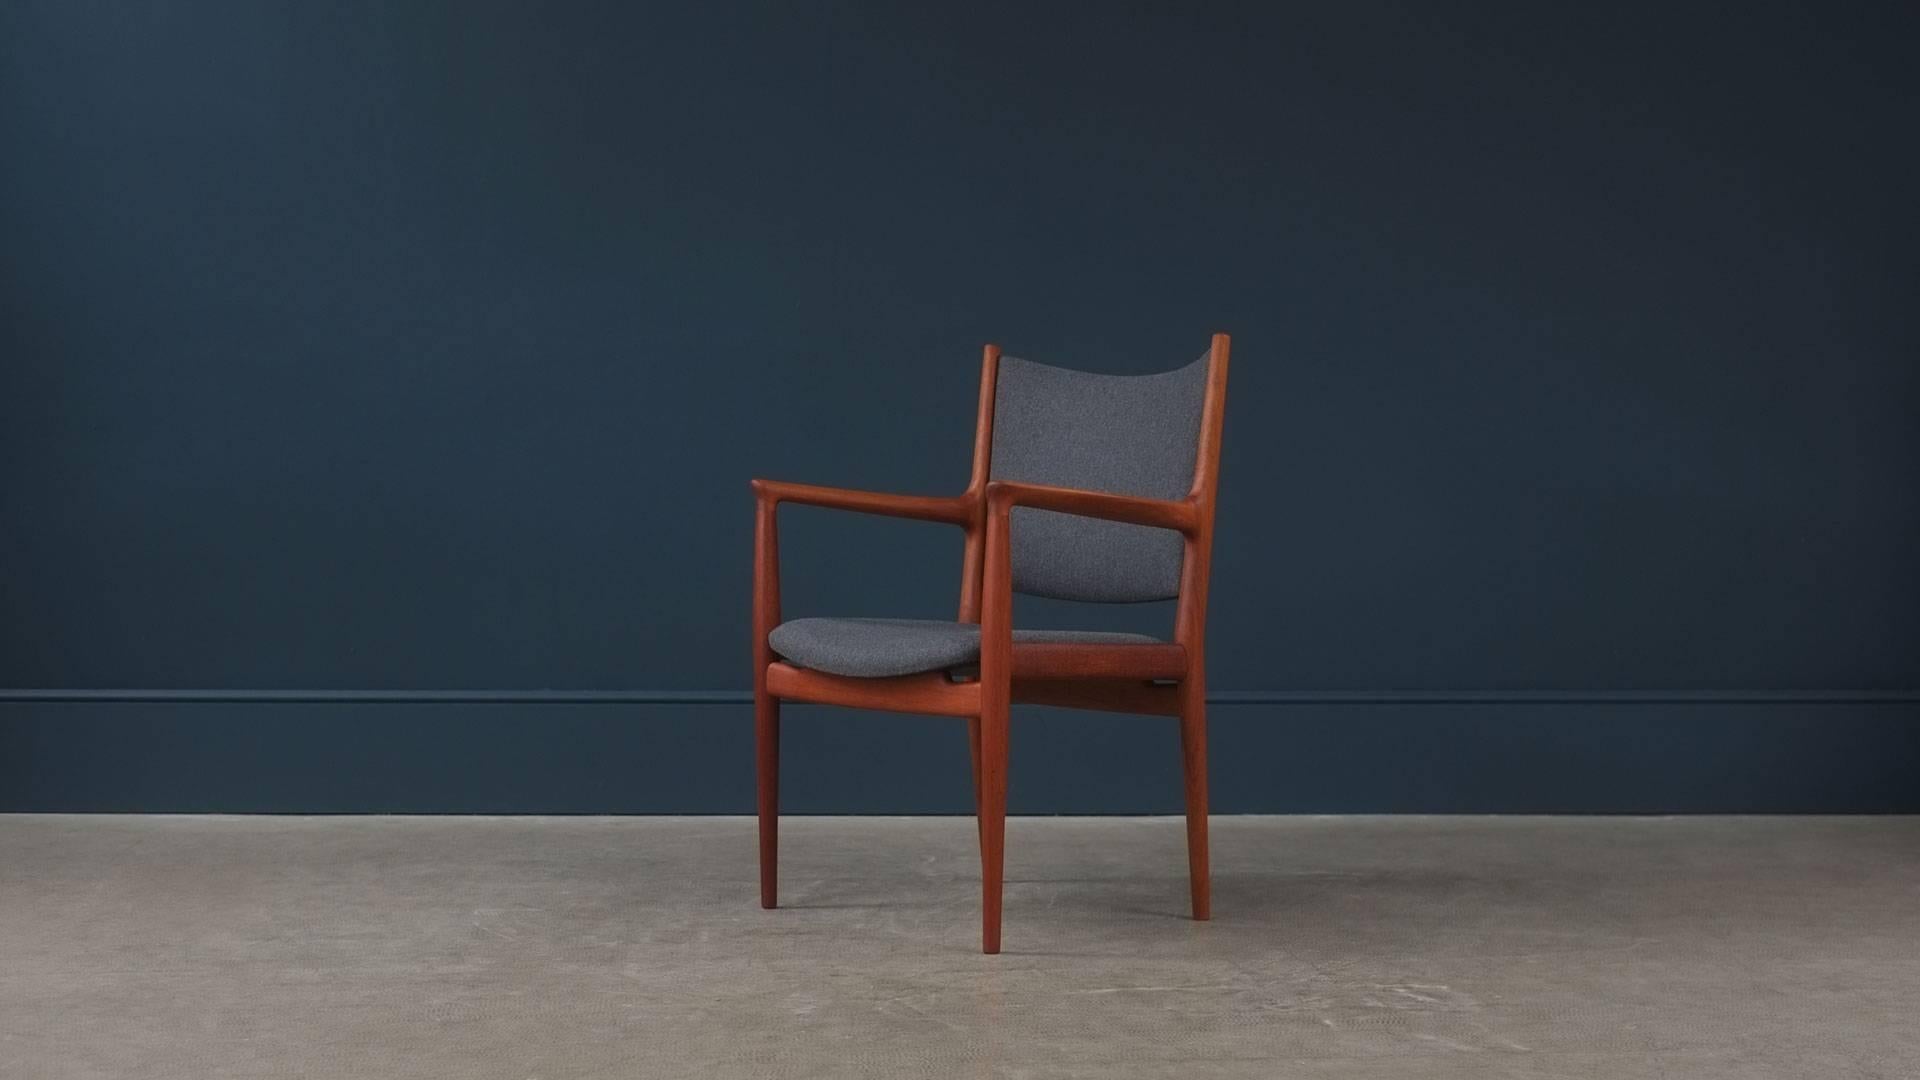 Beautiful JH713 armchair in solid teak designed by Hans Wegner for cabinet maker Johannes Hansen, Denmark. Fully reconditioned and re-upholstered in fantastic grey wool. Wonderful quality and super elegant chair.